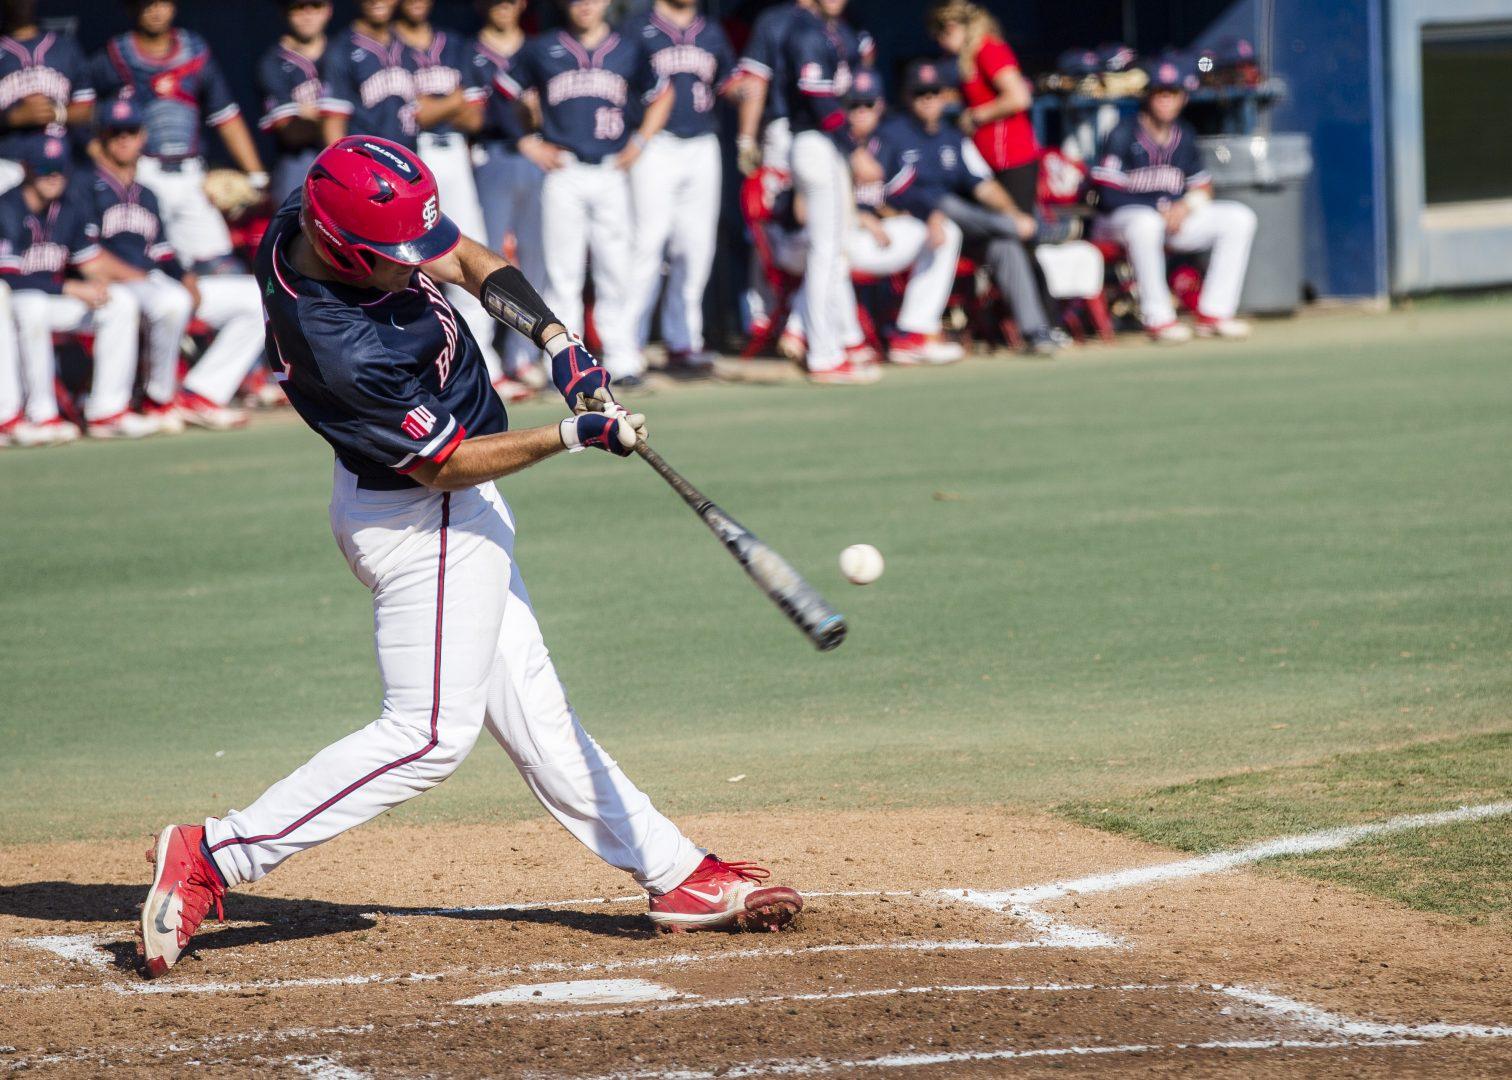 Freshman Zach Presno gets a hit against Michigan State on Feb. 17, 2018 at the Pete Beiden Field. The ‘Dogs won 9-4. (Ramuel Reyes/The Collegian)